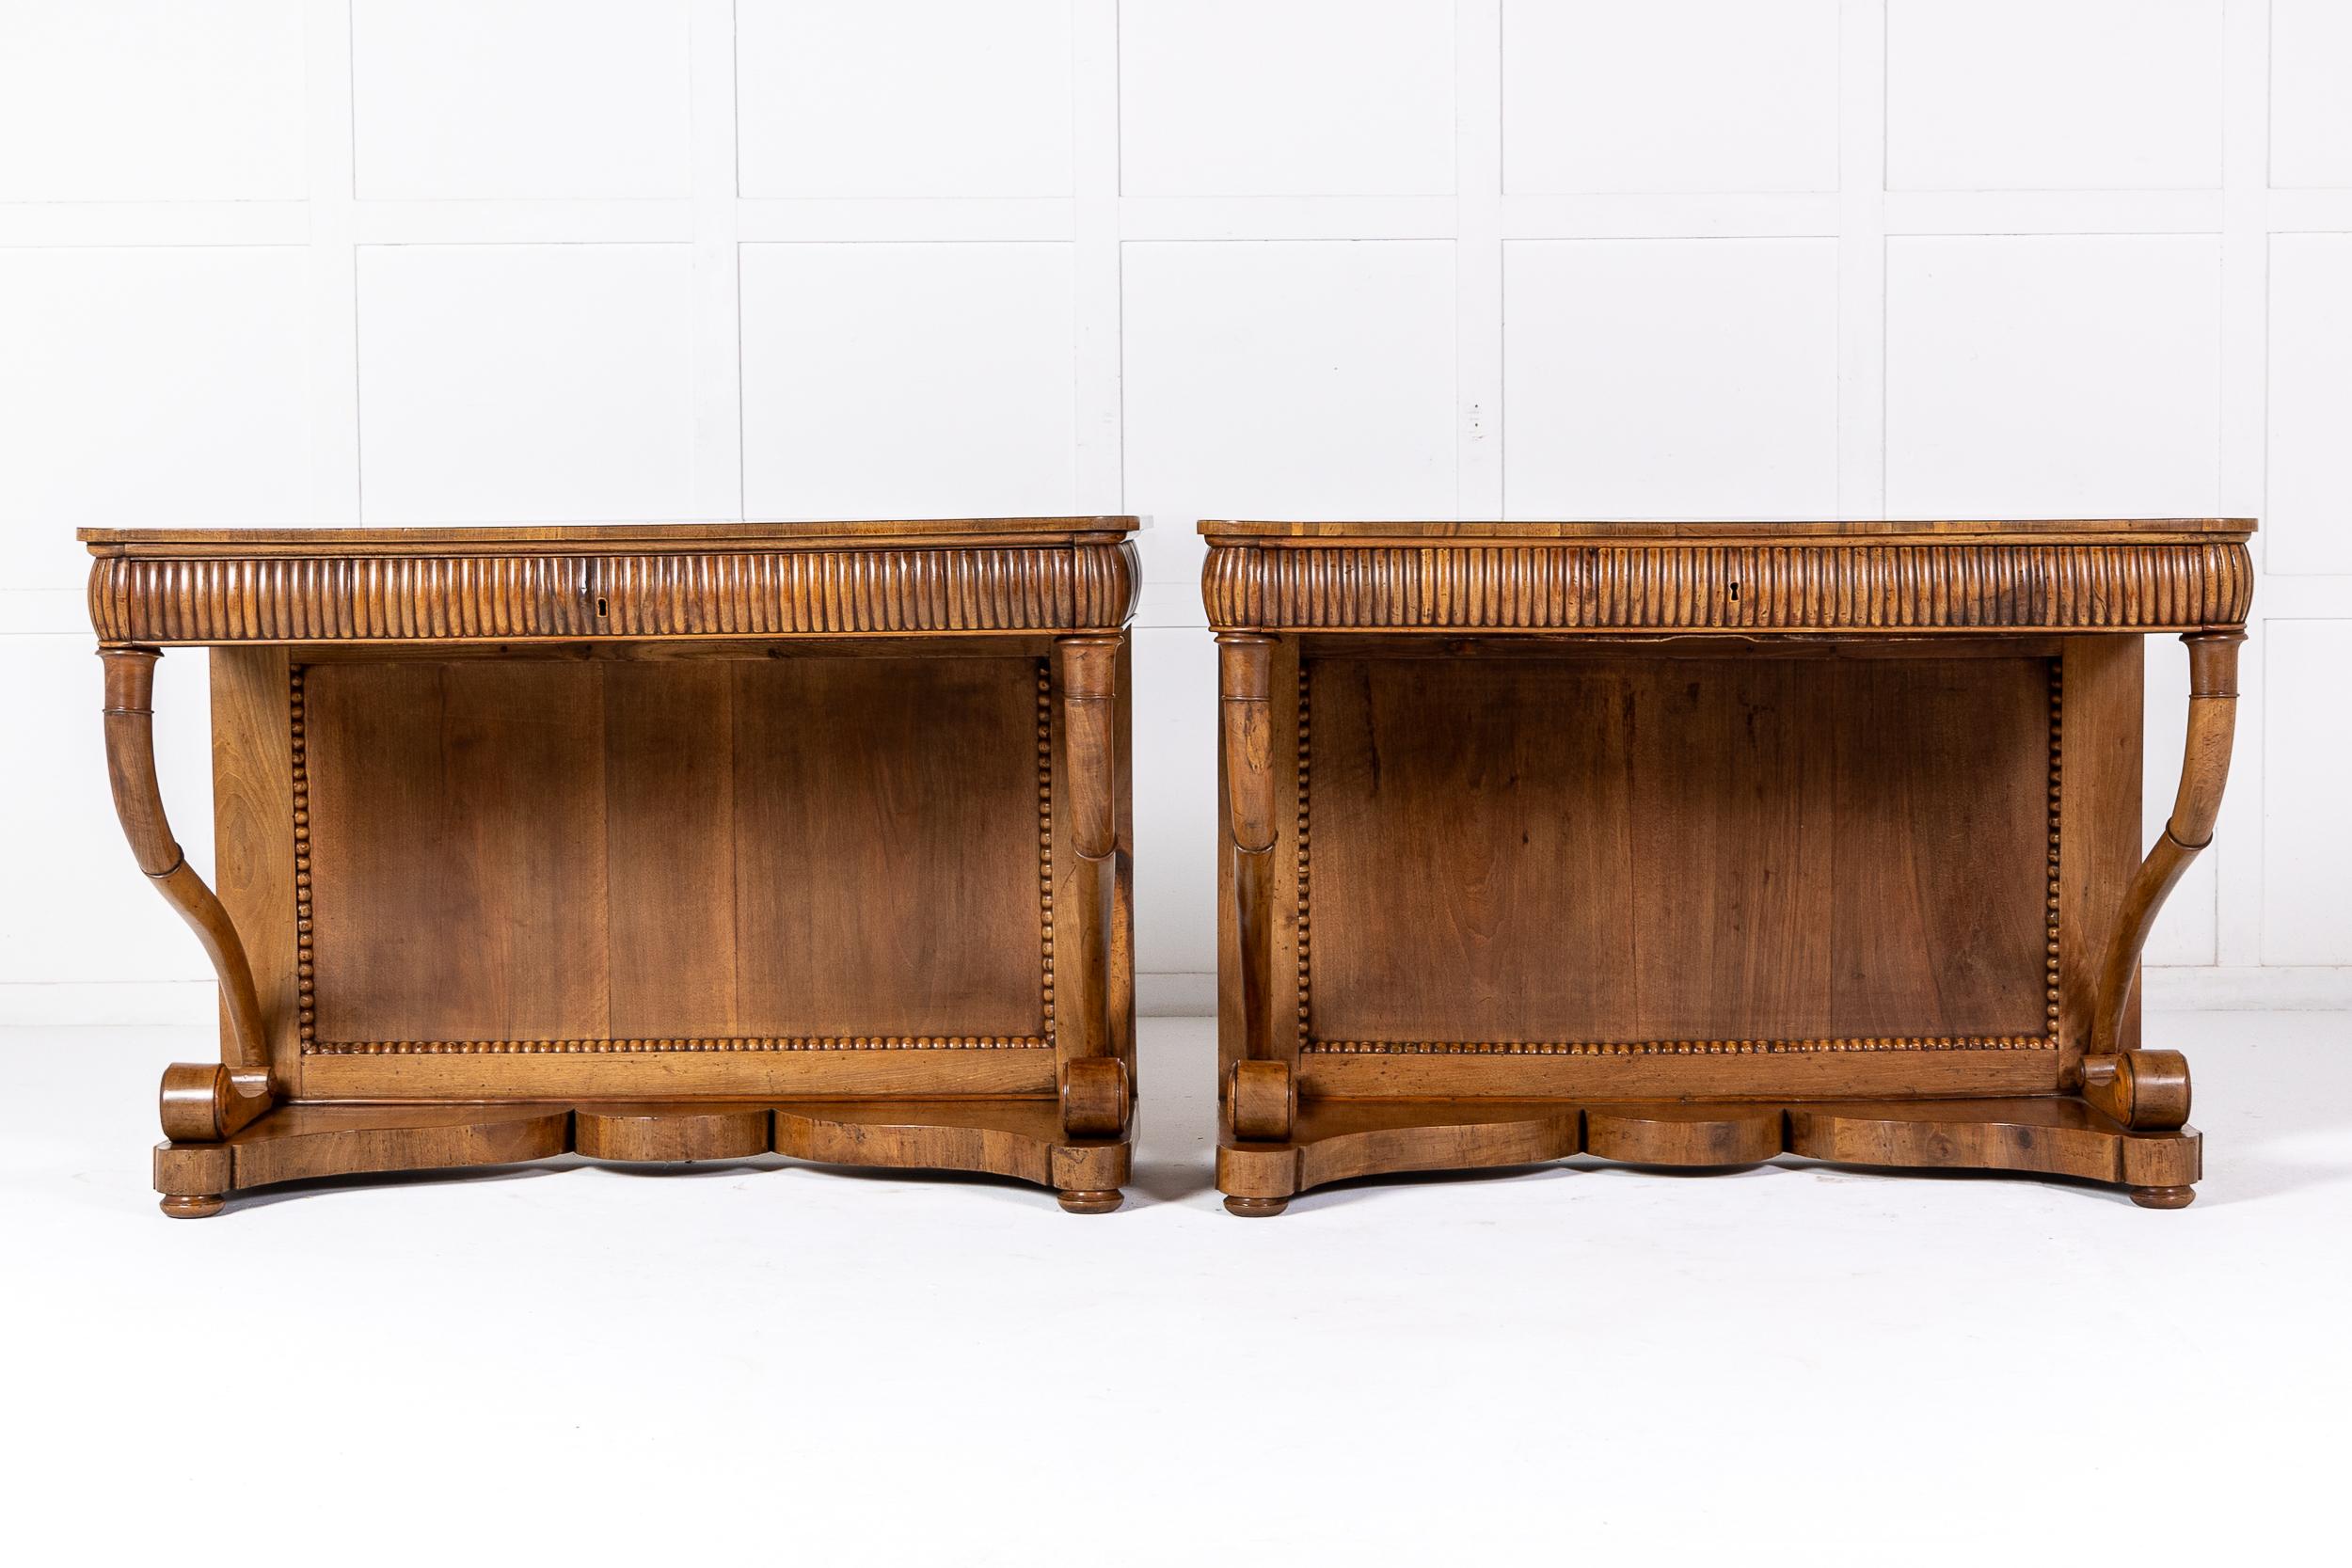 An Interesting and Good Sized Pair of 19th Century Italian Walnut Console Tables.

These fine tables have panelled backs surrounded by fine beaded mouldings. The rectangular tops have rounded corners and are inlaid in the centre with exceptionally